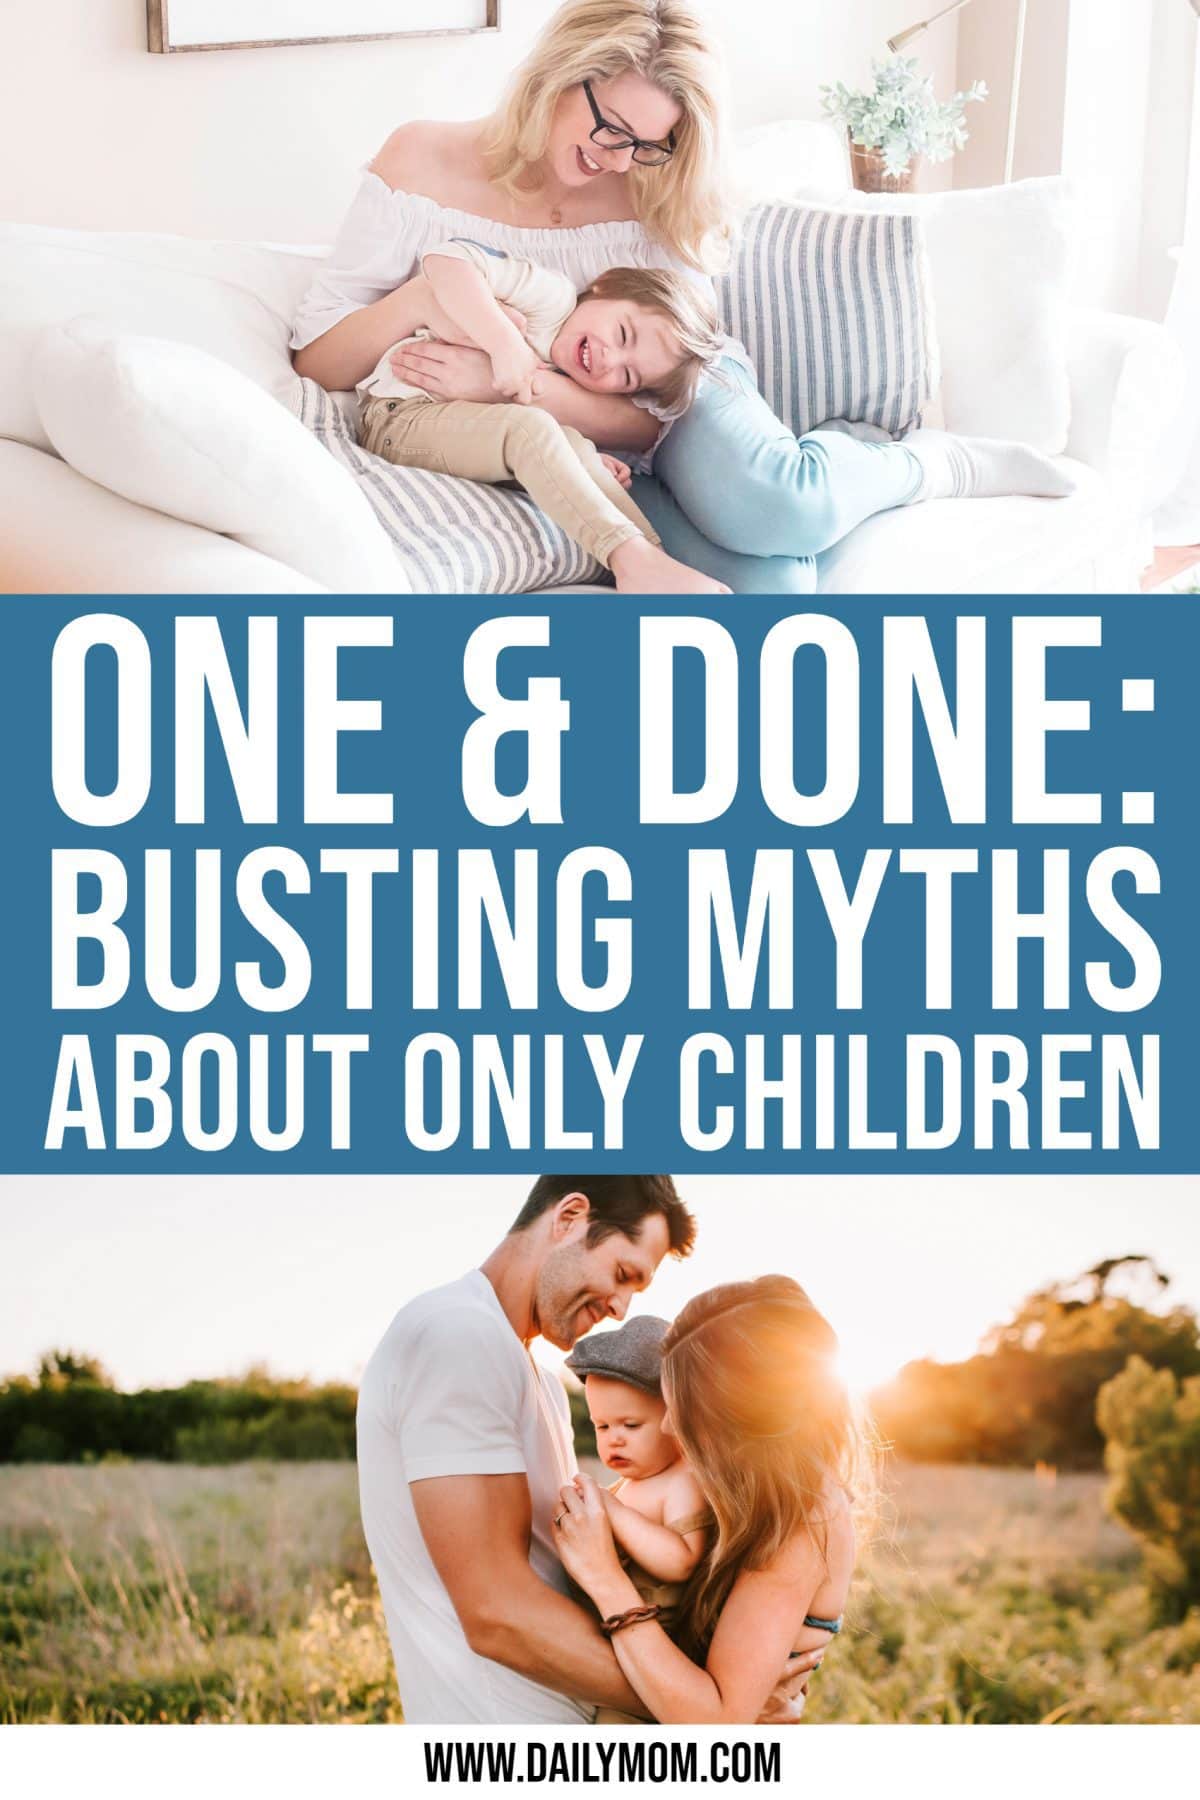 One & Done: Busting Myths About Only Children